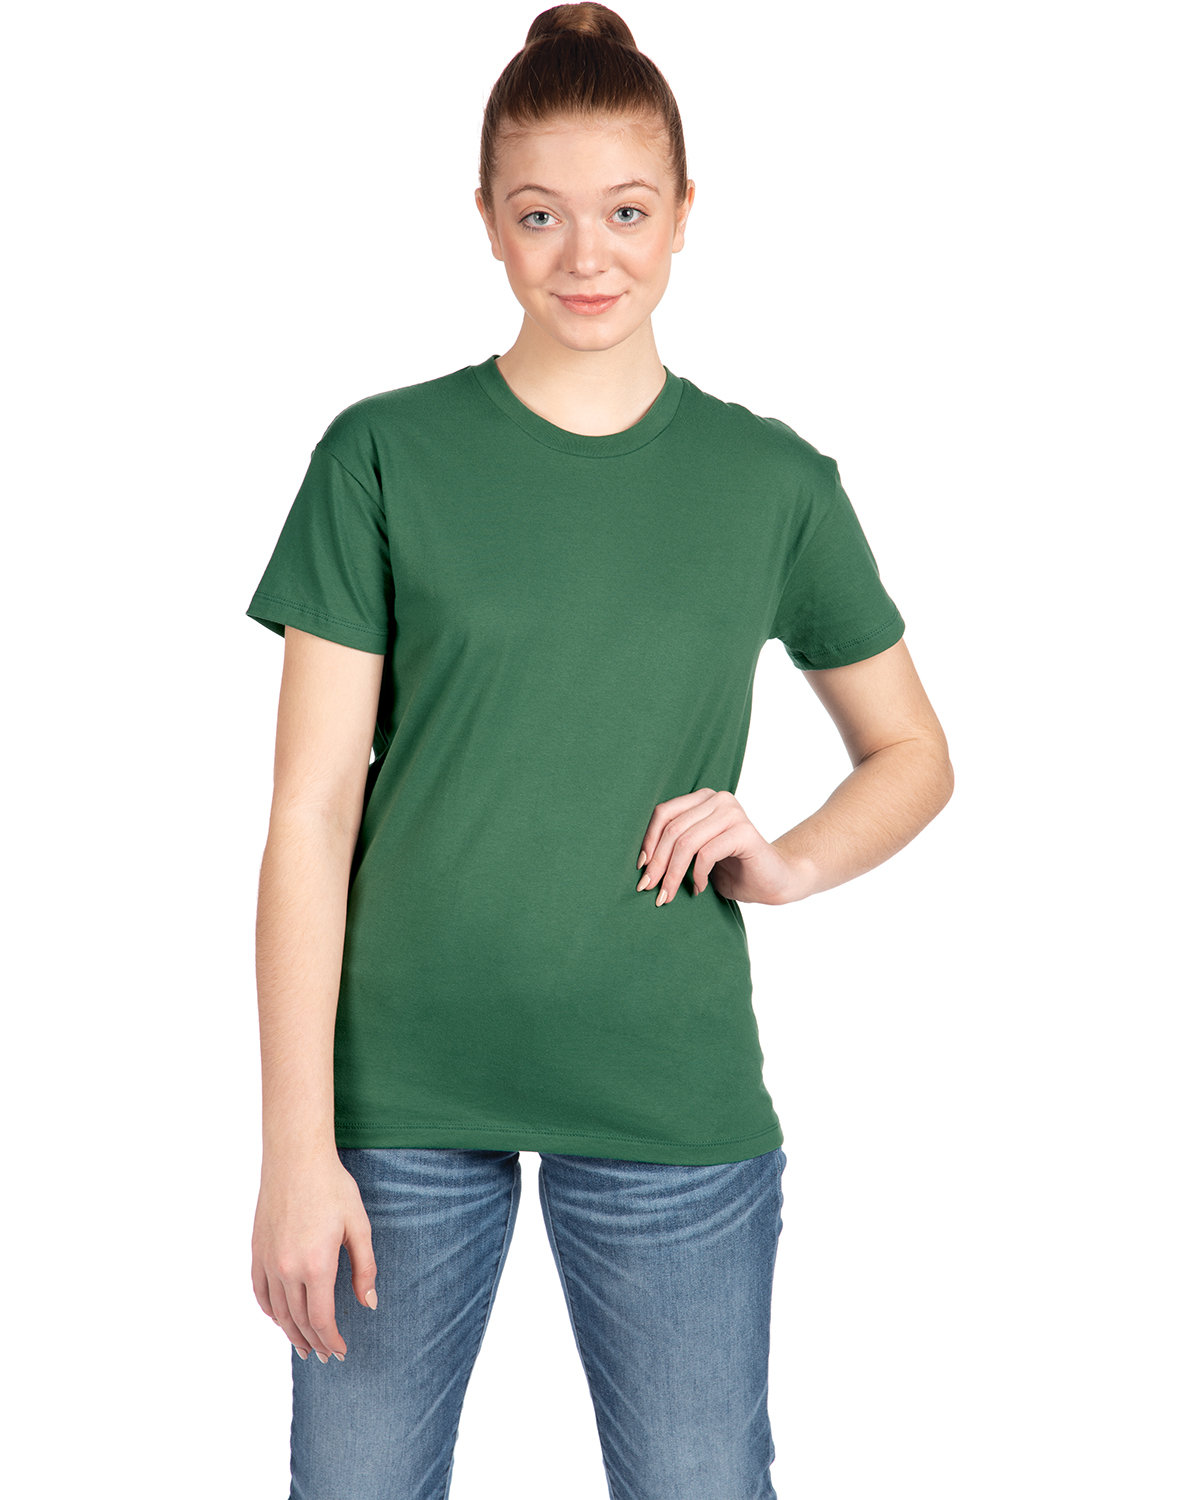 Next Level Apparel Ladies' Relaxed T-Shirt | alphabroder